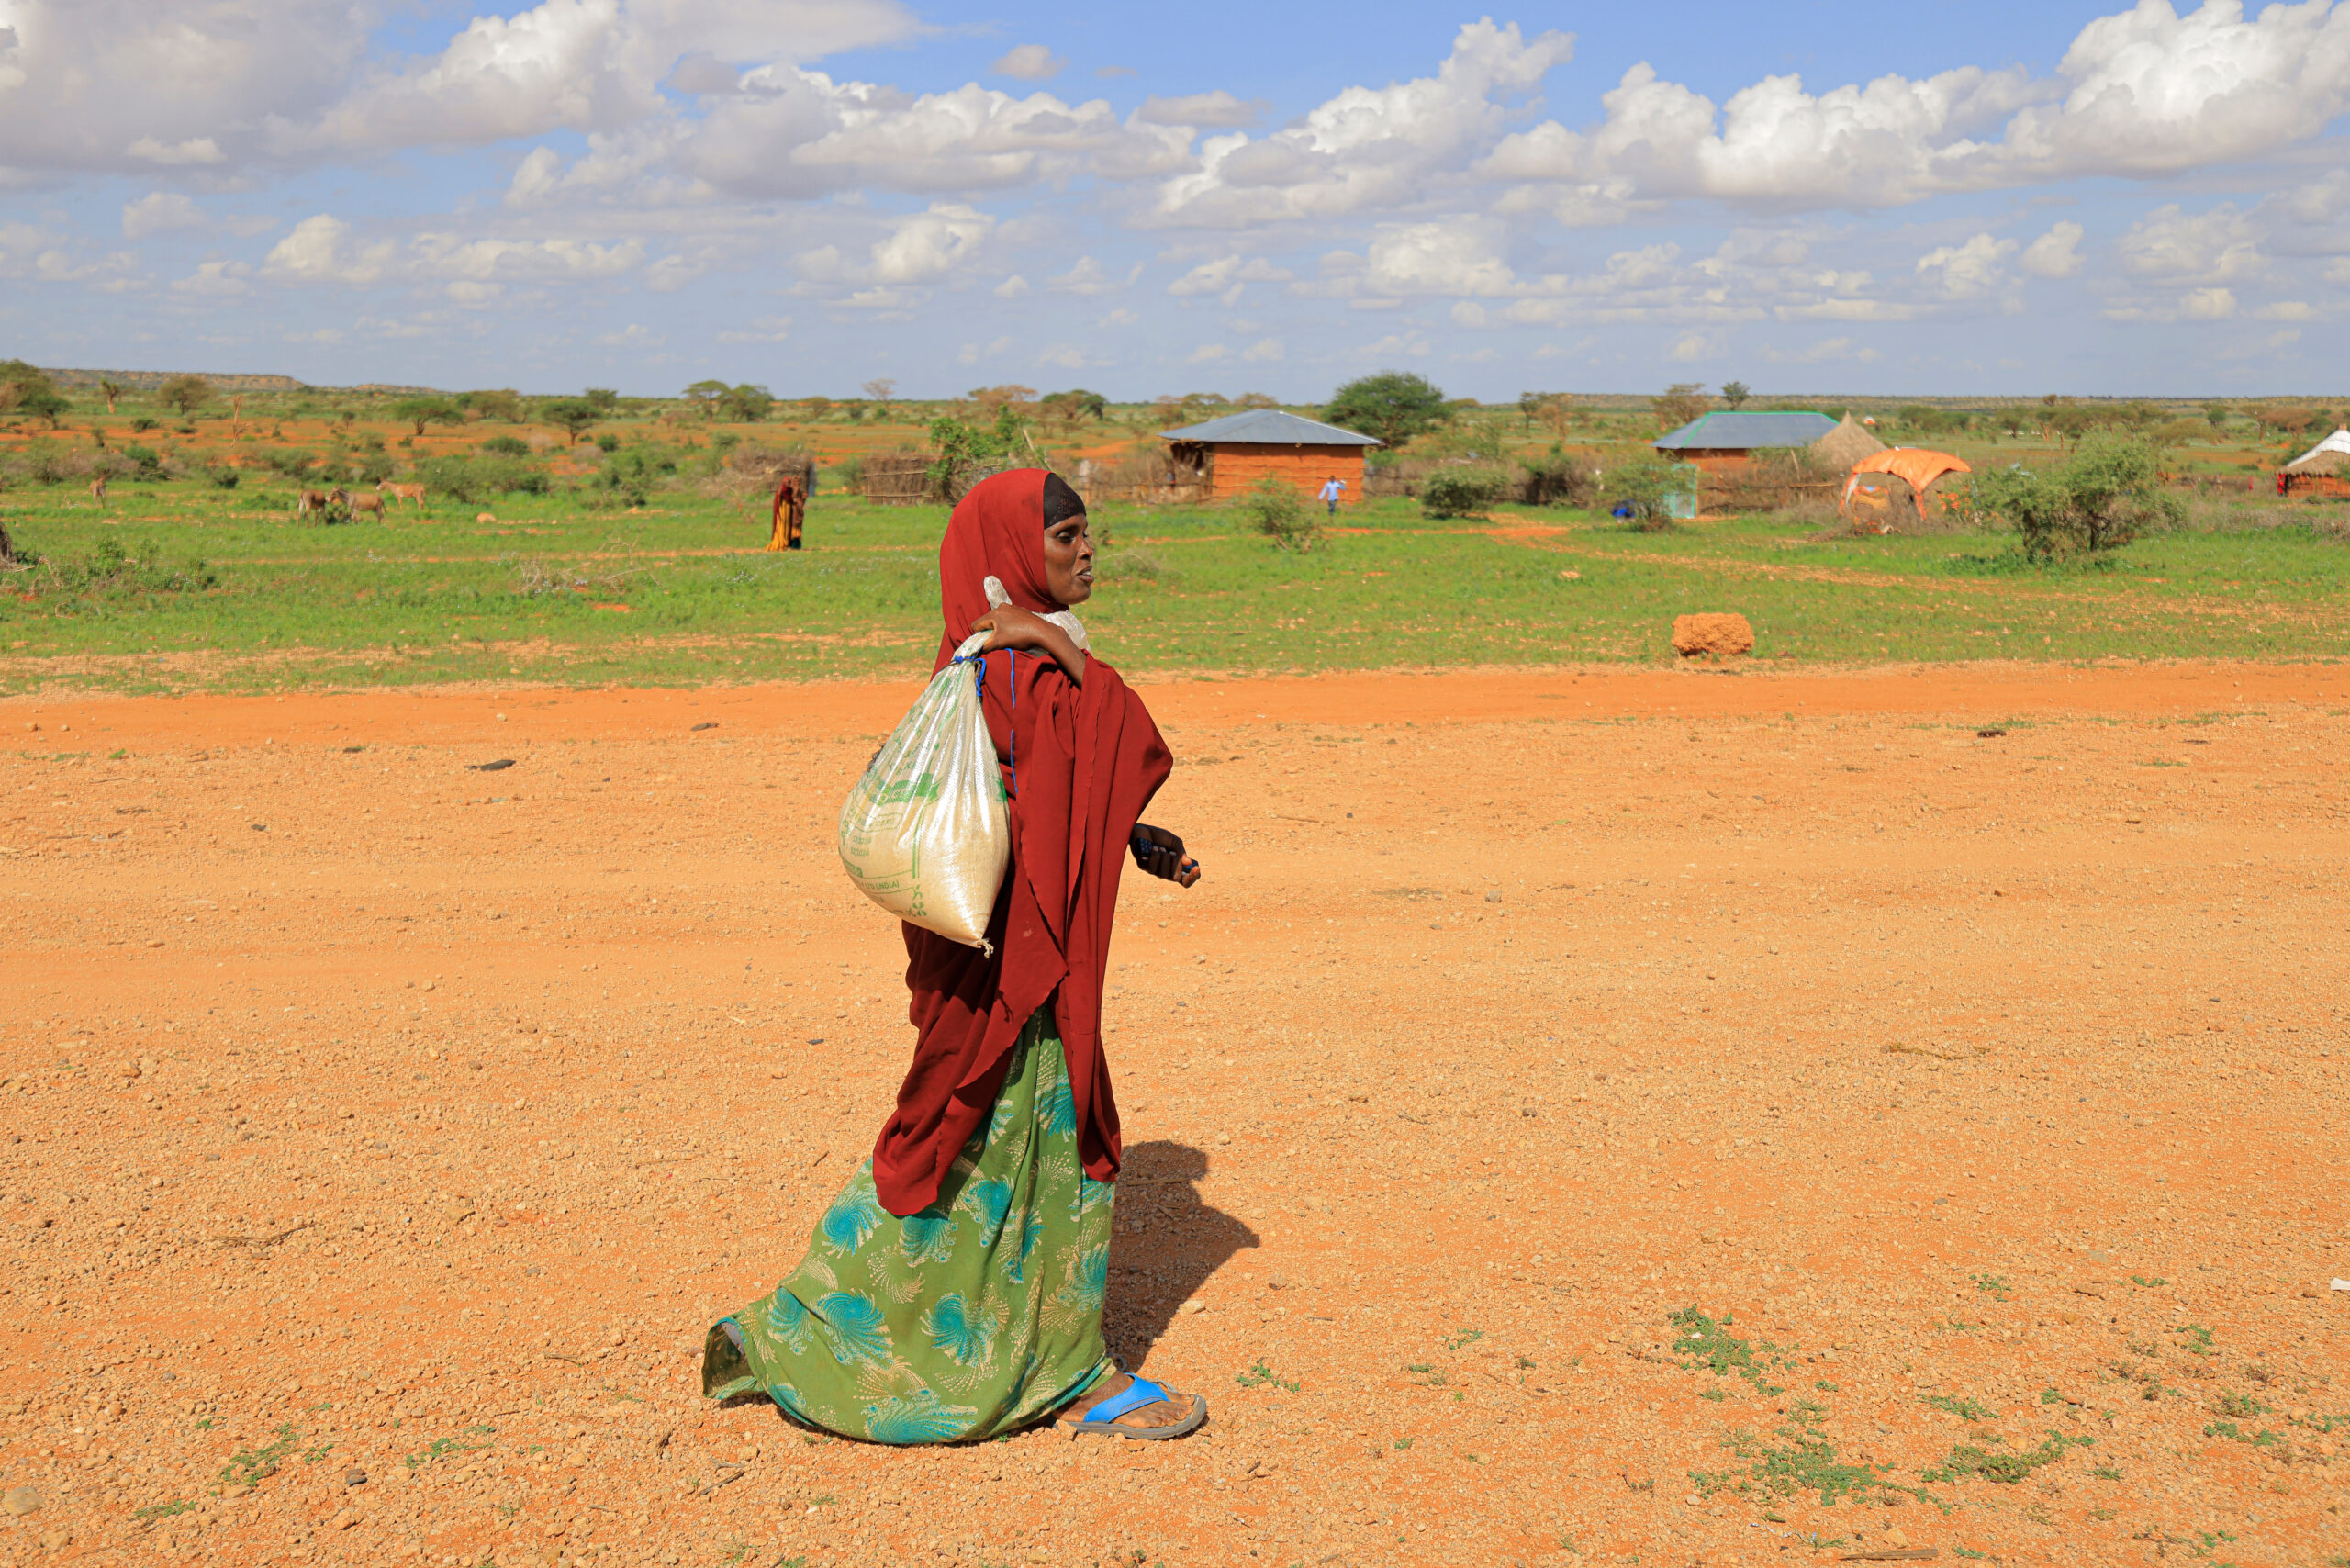 A woman displaced by severe drought in Ethiopia returns to her shelter after buying groceries with cash assistance she received from UNHCR. © UNHCR/Tiksa Negeri